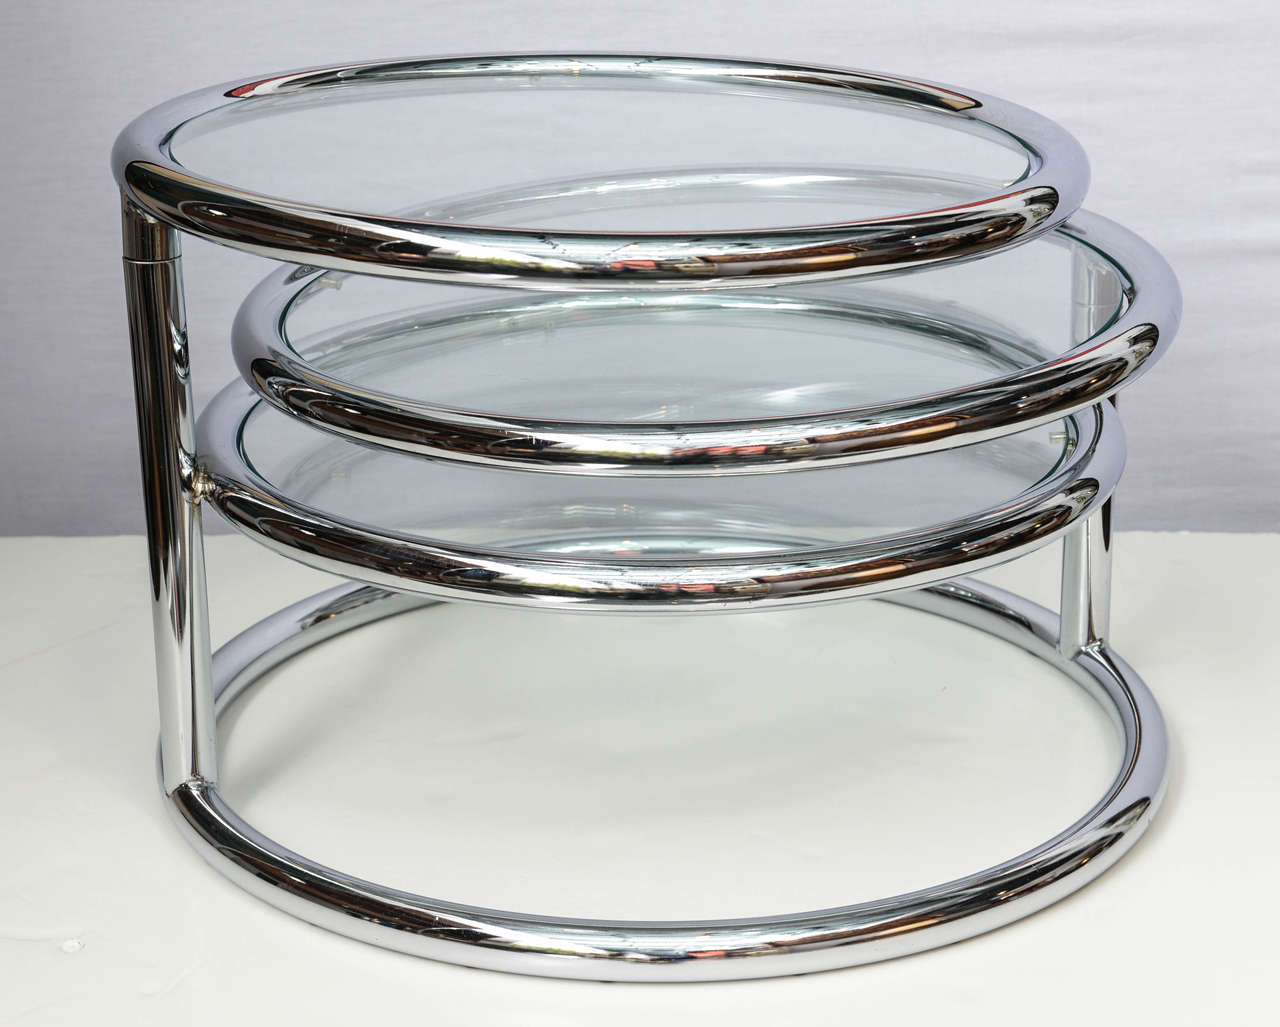 Options never cease with this wonderful coffee table. Three tiers of polished chrome tubular framed and glass easily fold and open to your need and pleasure. It can be used as a side table as a coffee table when is totally open and works well with